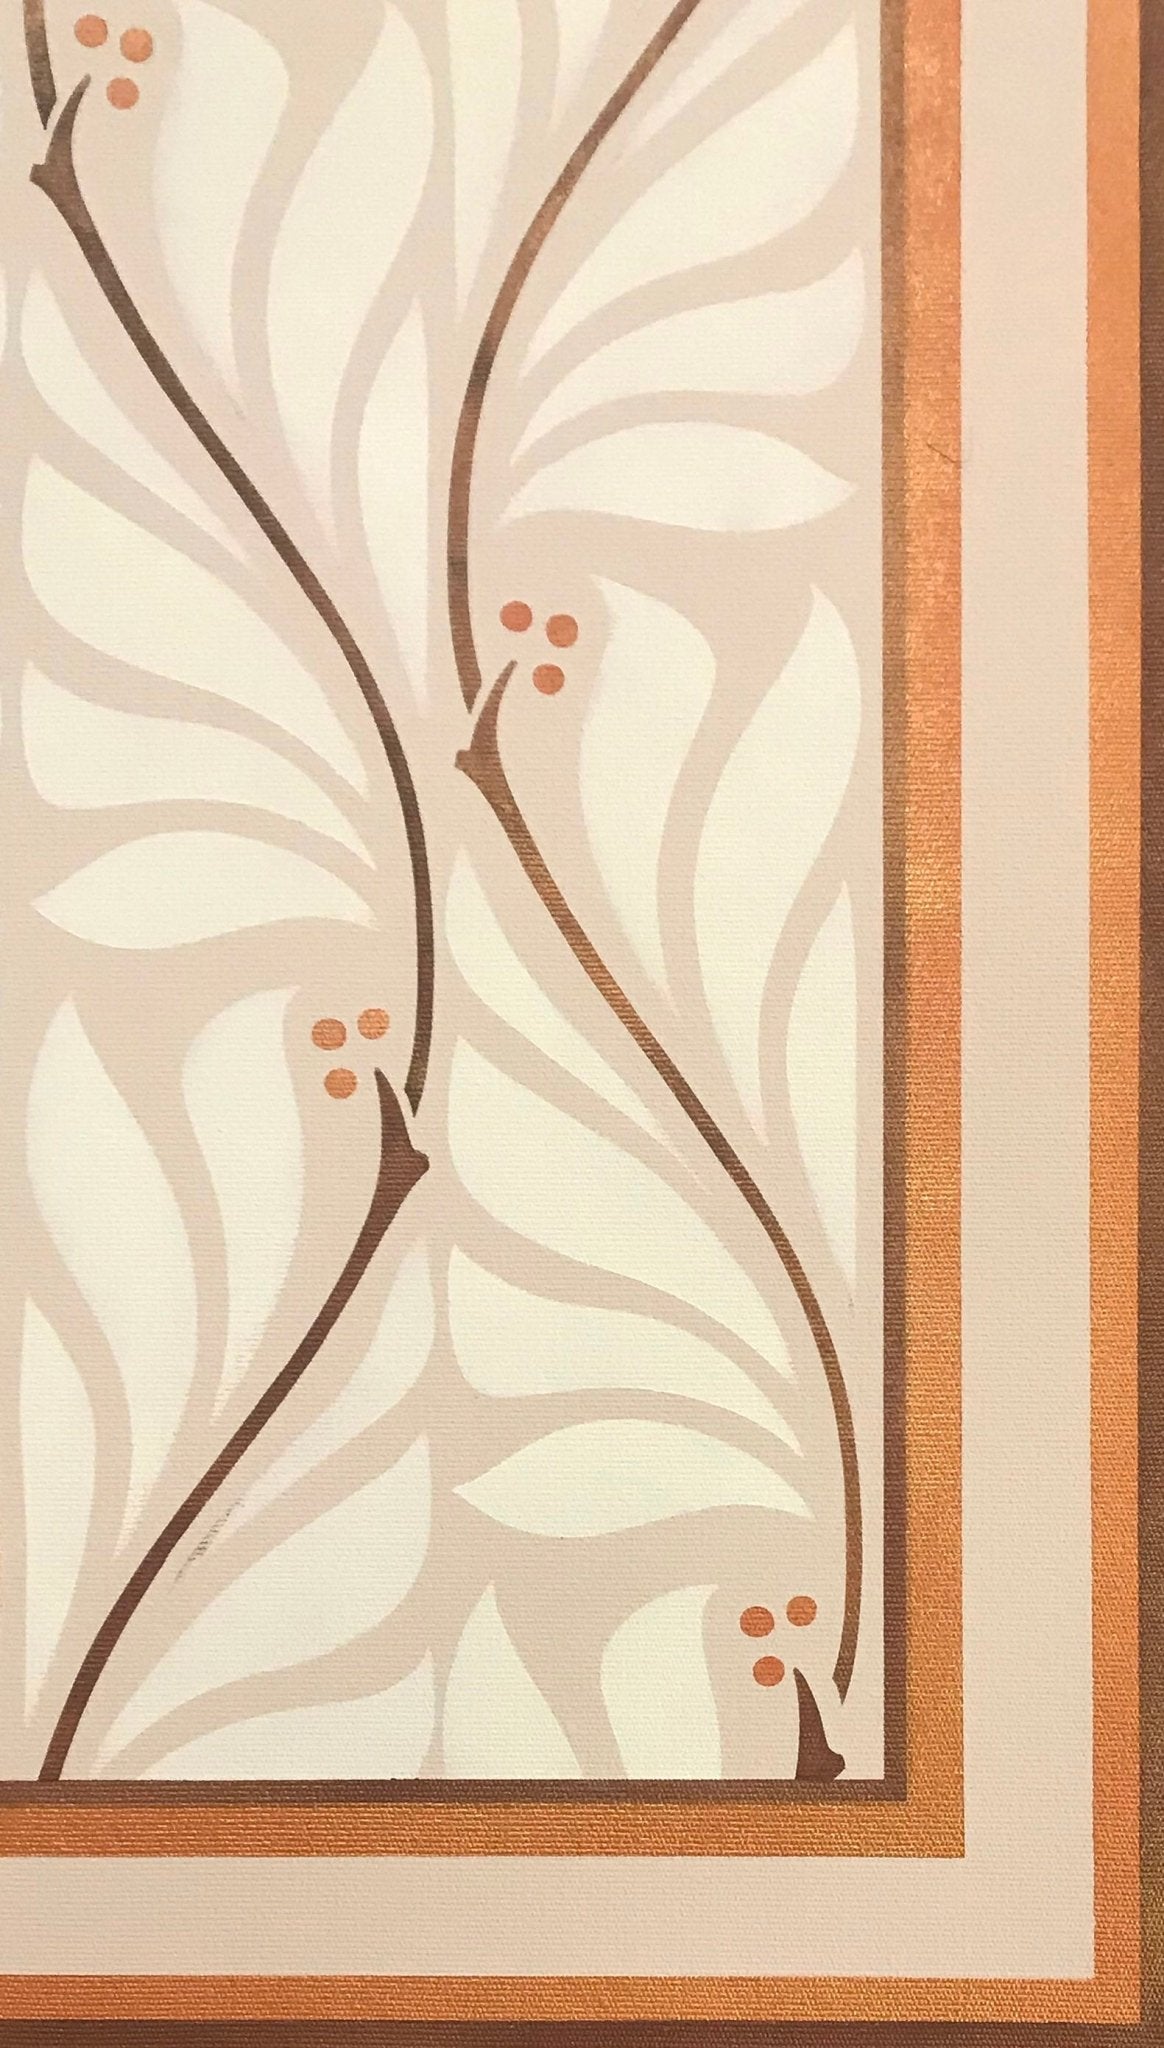 A close up of the corner of this floorcloth, with simple banding around the center motifs of undulating vines and berries.